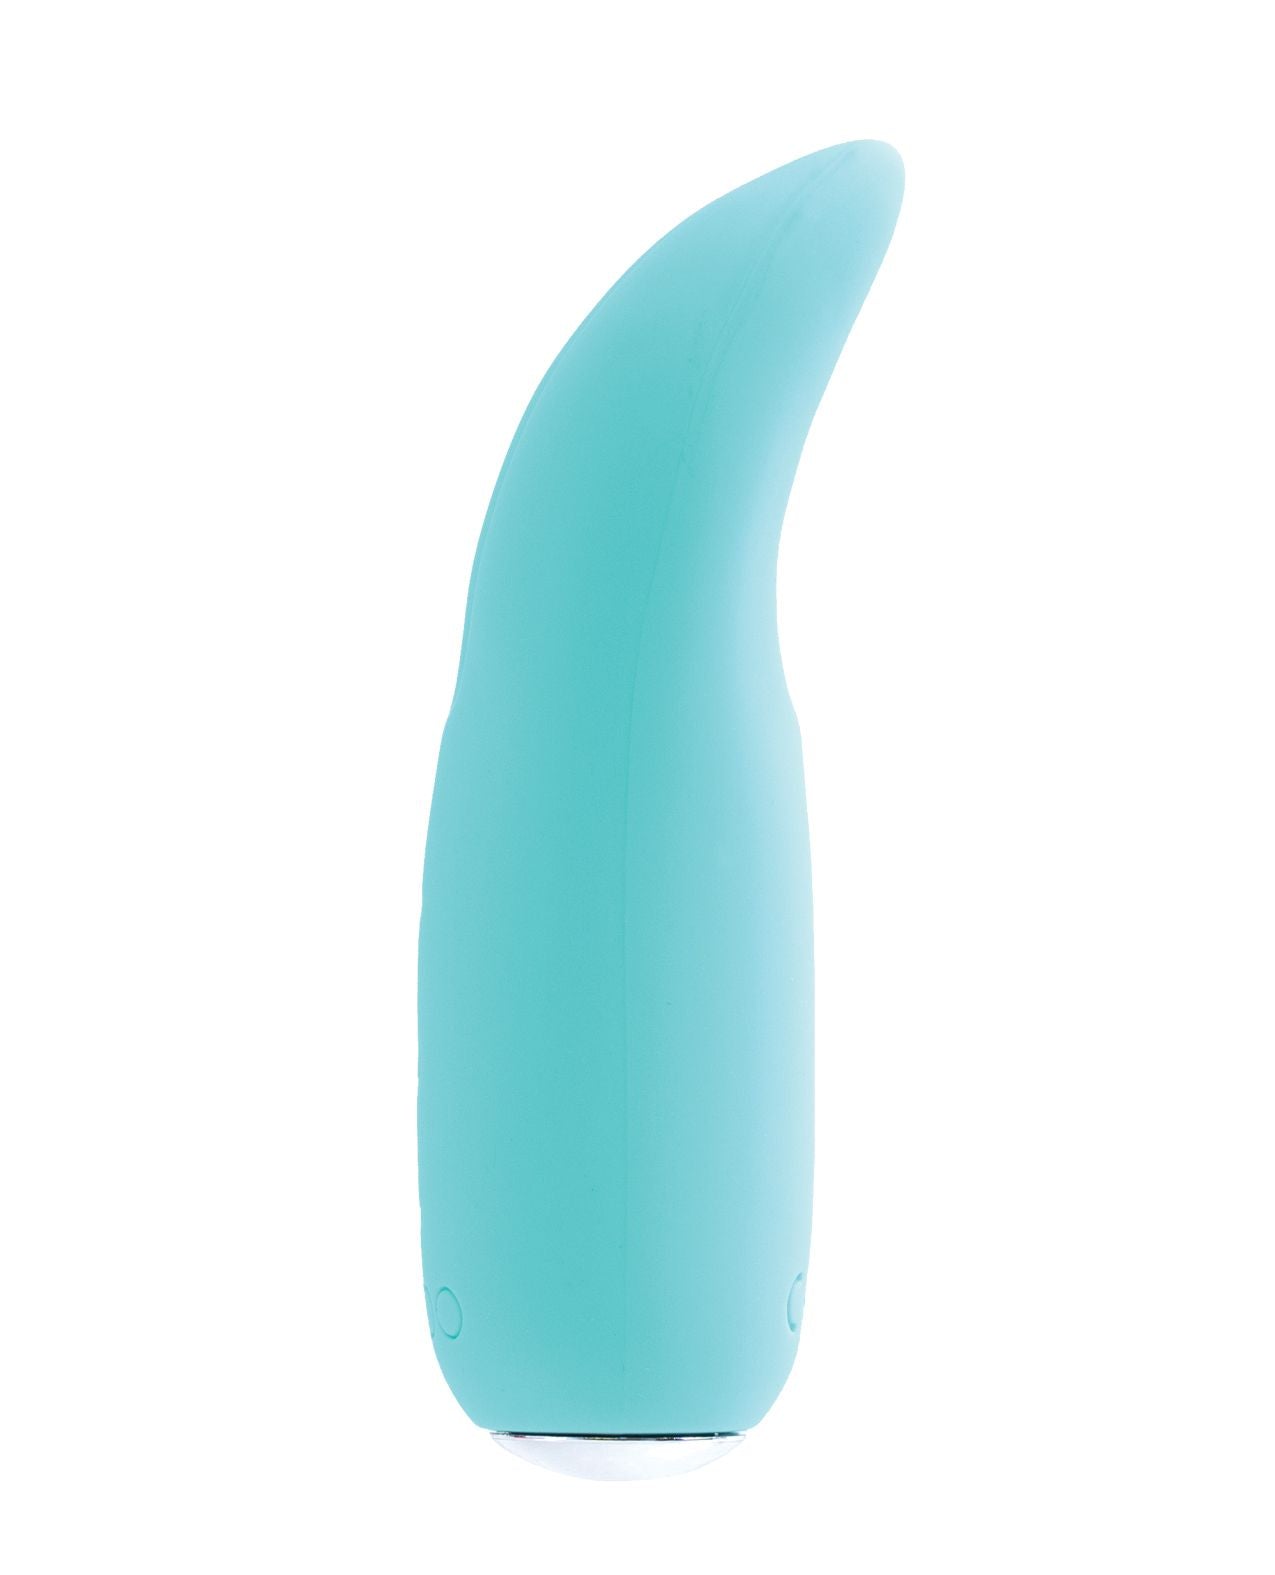 Side view of the dual stim showing its unique shape and narrow tip for pin point stimulation (turquoise).